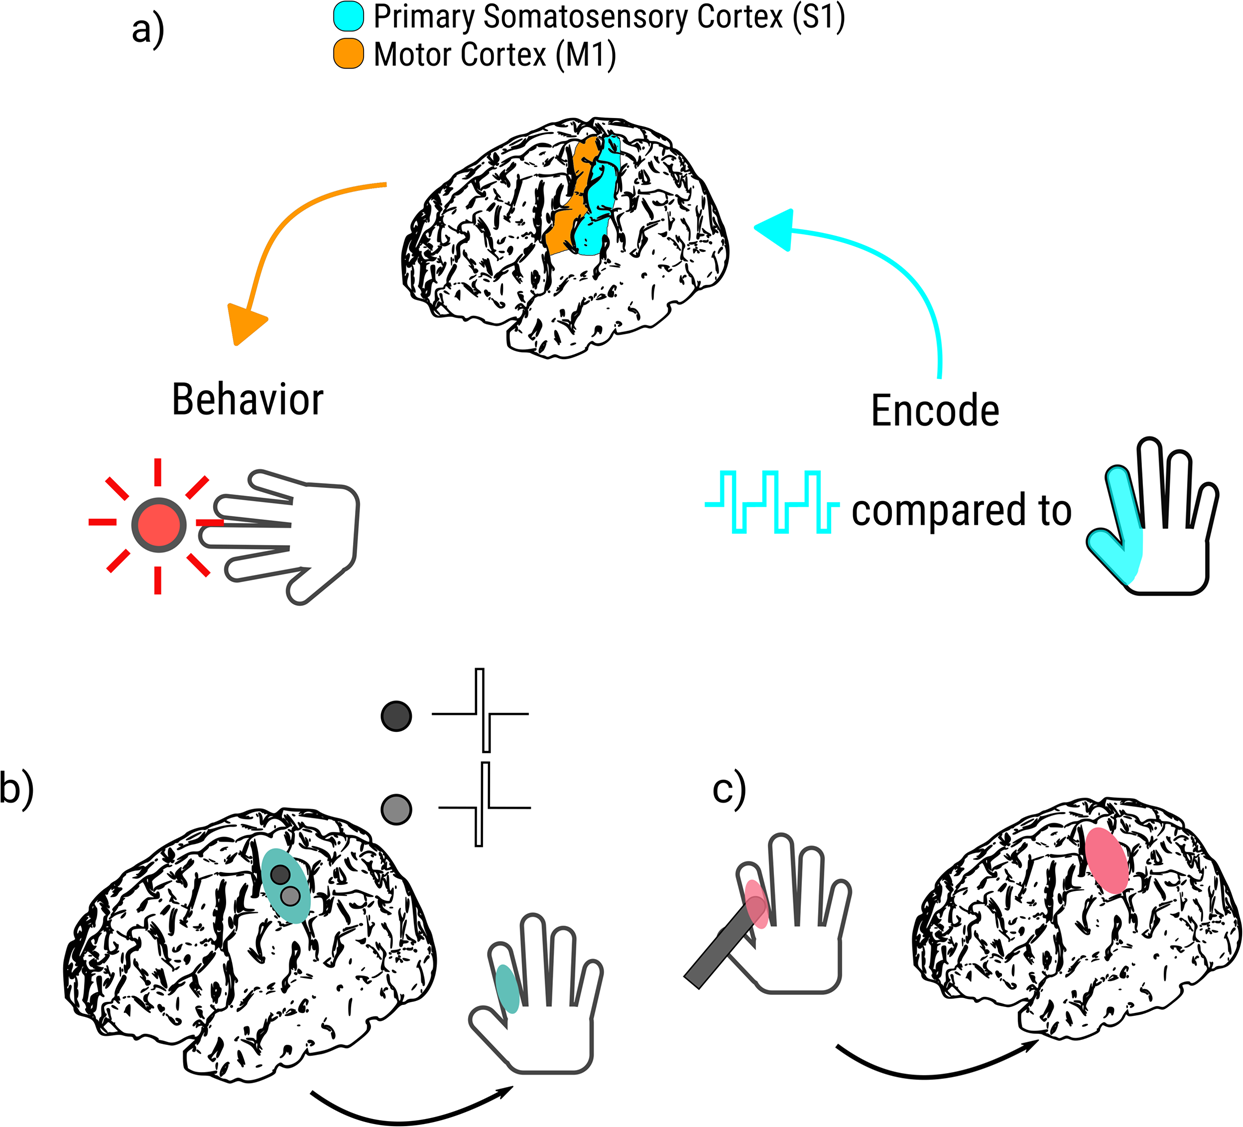 Aberrant inhibitory processing in the somatosensory cortices of